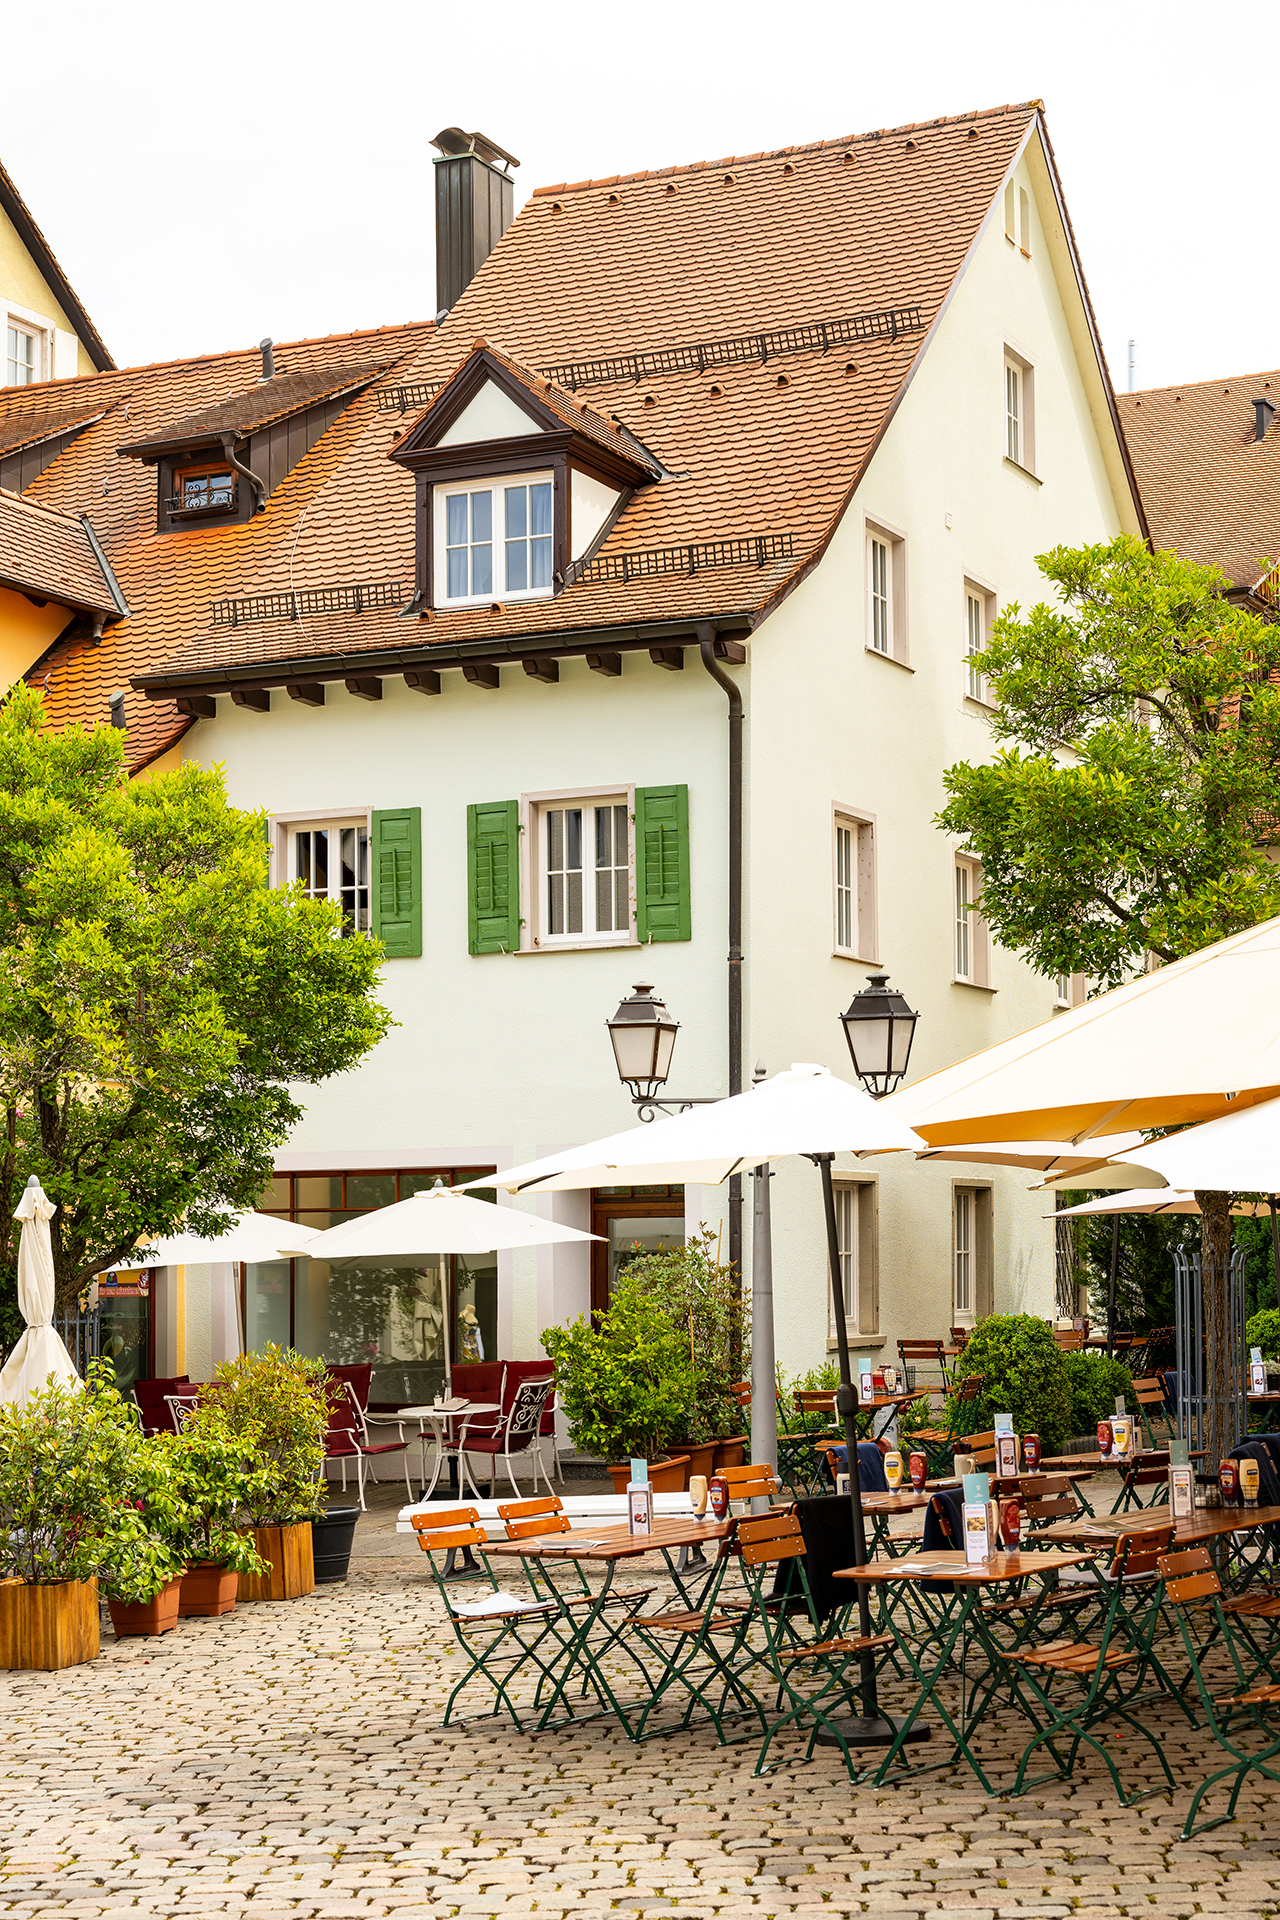 Holiday apartments on Lake Constance: Guest House "Am Schlossplatz", Room #5 - Exterior